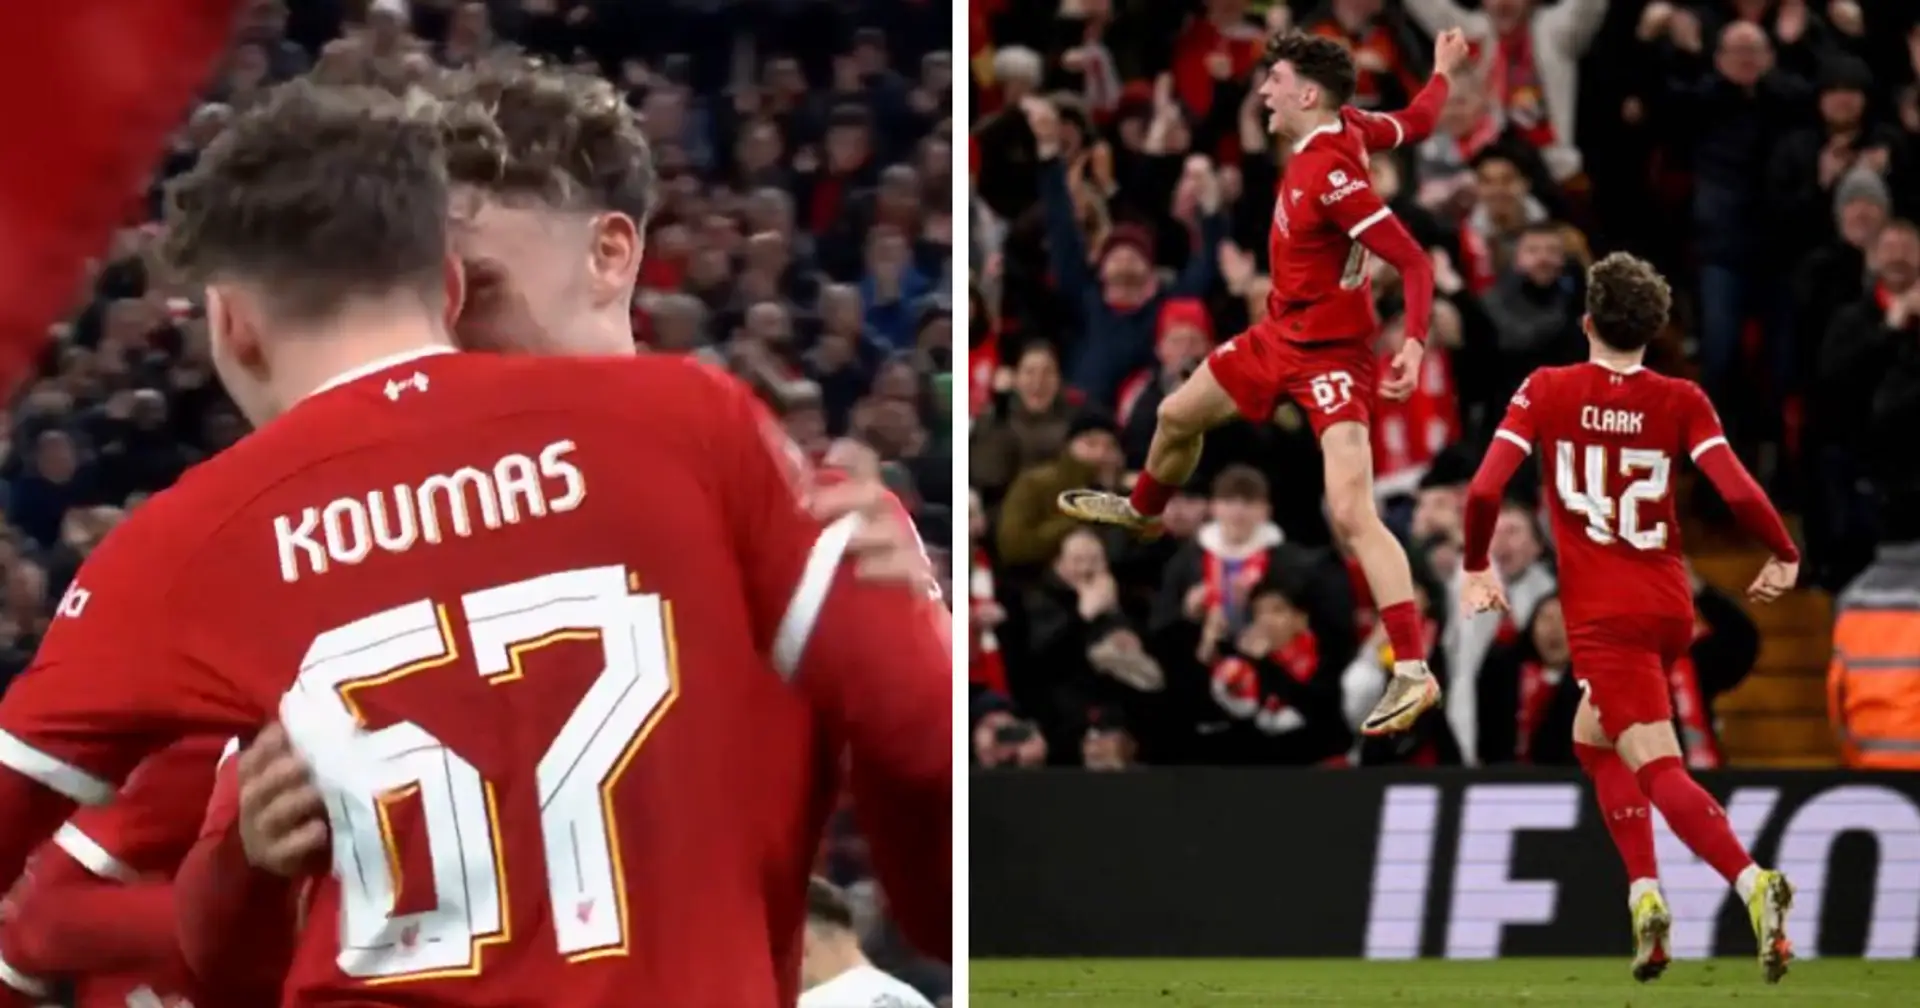 SPOTTED: Lewis Koumas overwhelmed by emotions after scoring debut Liverpool goal